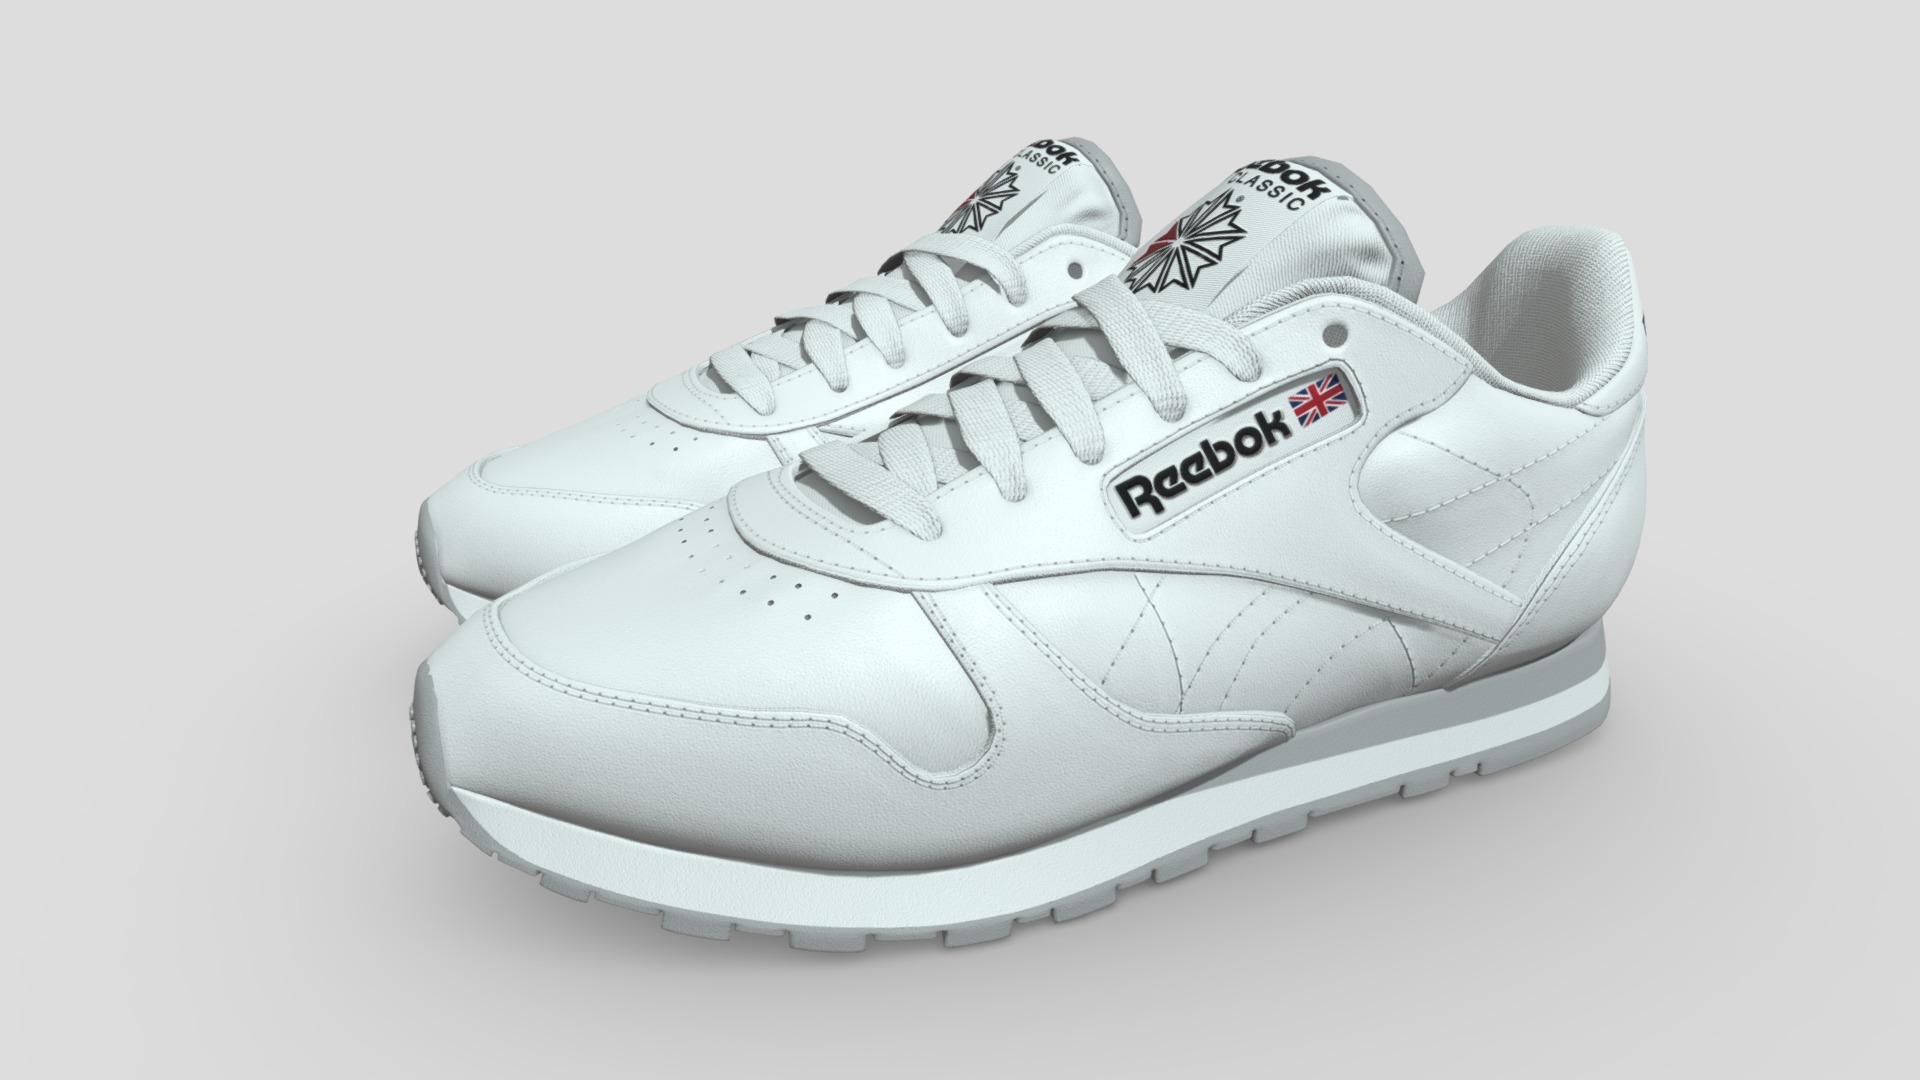 3D model Ree Bok Classic white  Leather - This is a 3D model of the Ree Bok Classic white  Leather. The 3D model is about a white and grey tennis shoe.